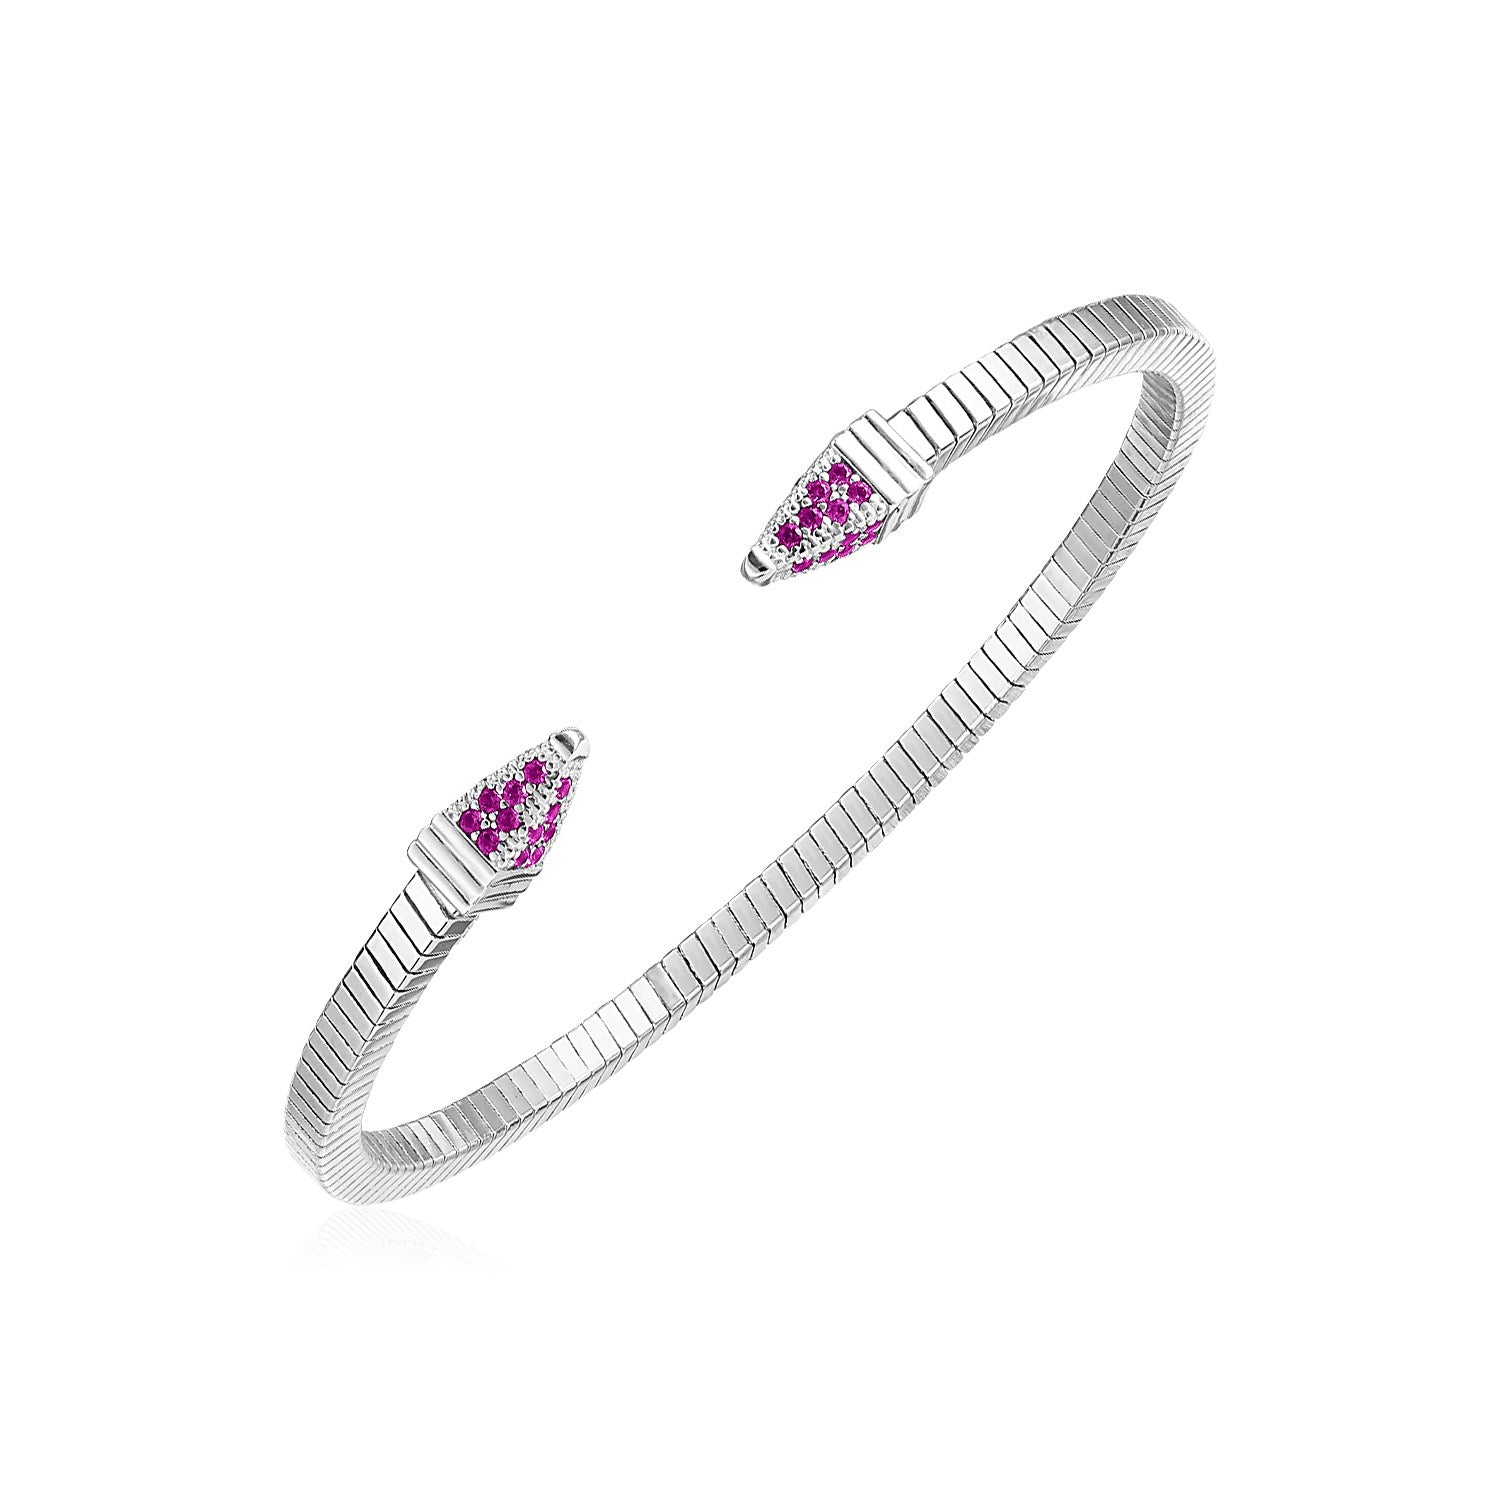 Sterling Silver Spike Cuff Bracelet with Raspberry Cubic Zirconias